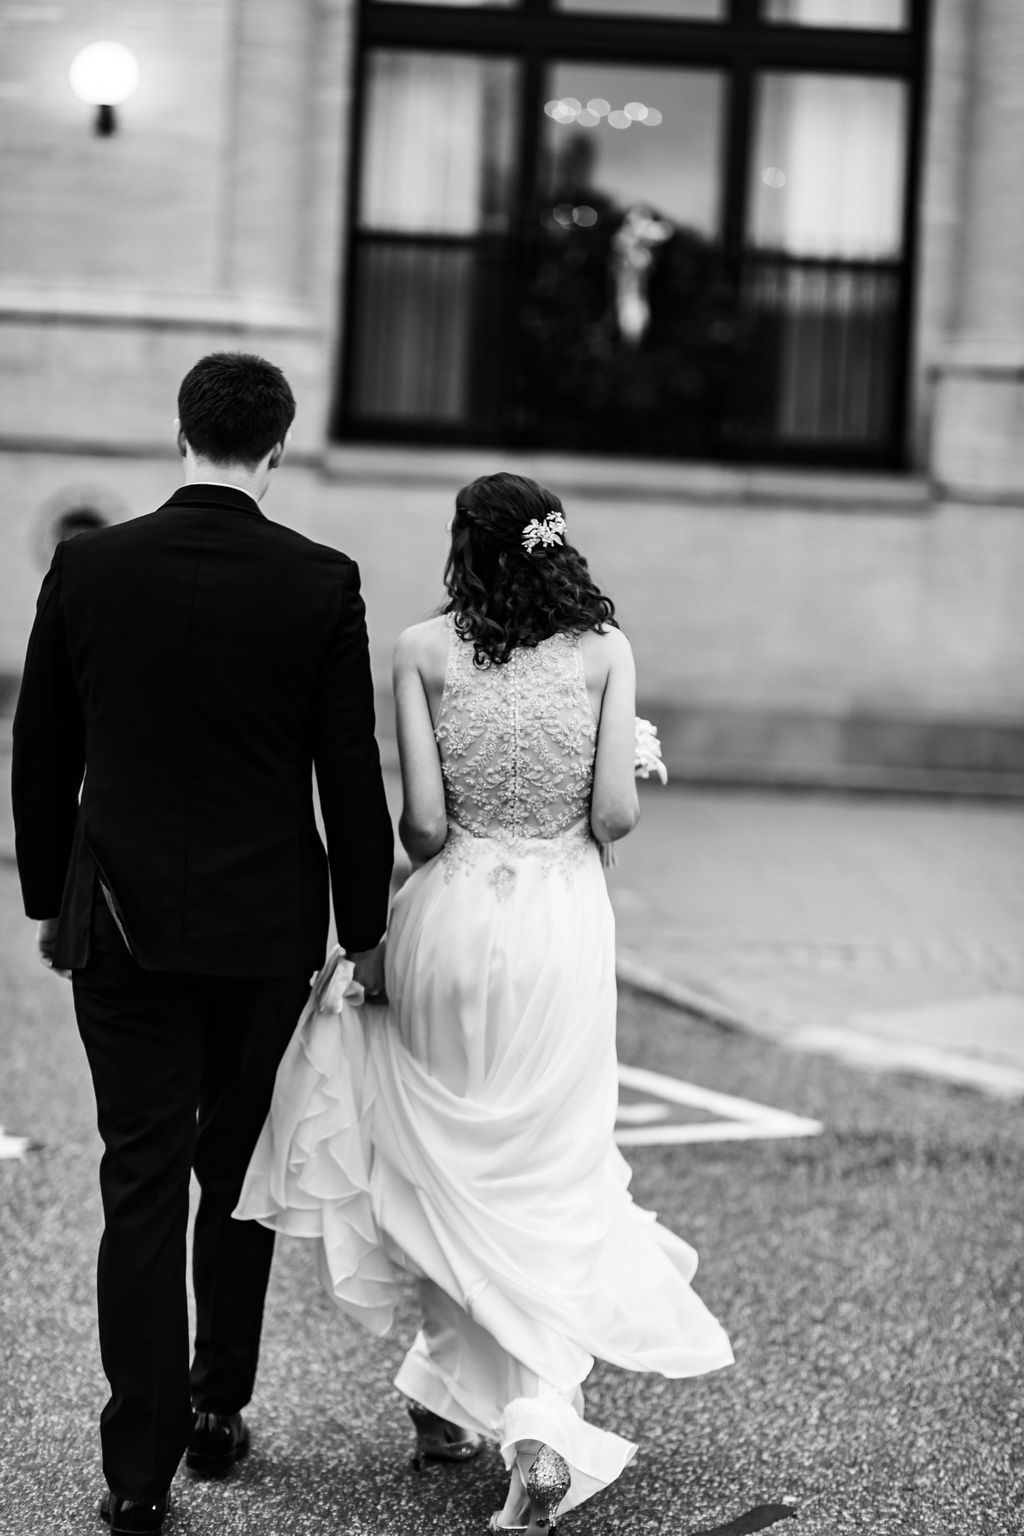 When the groom carries the brides dress so she doesn't trip - Pearl Weddings & Events